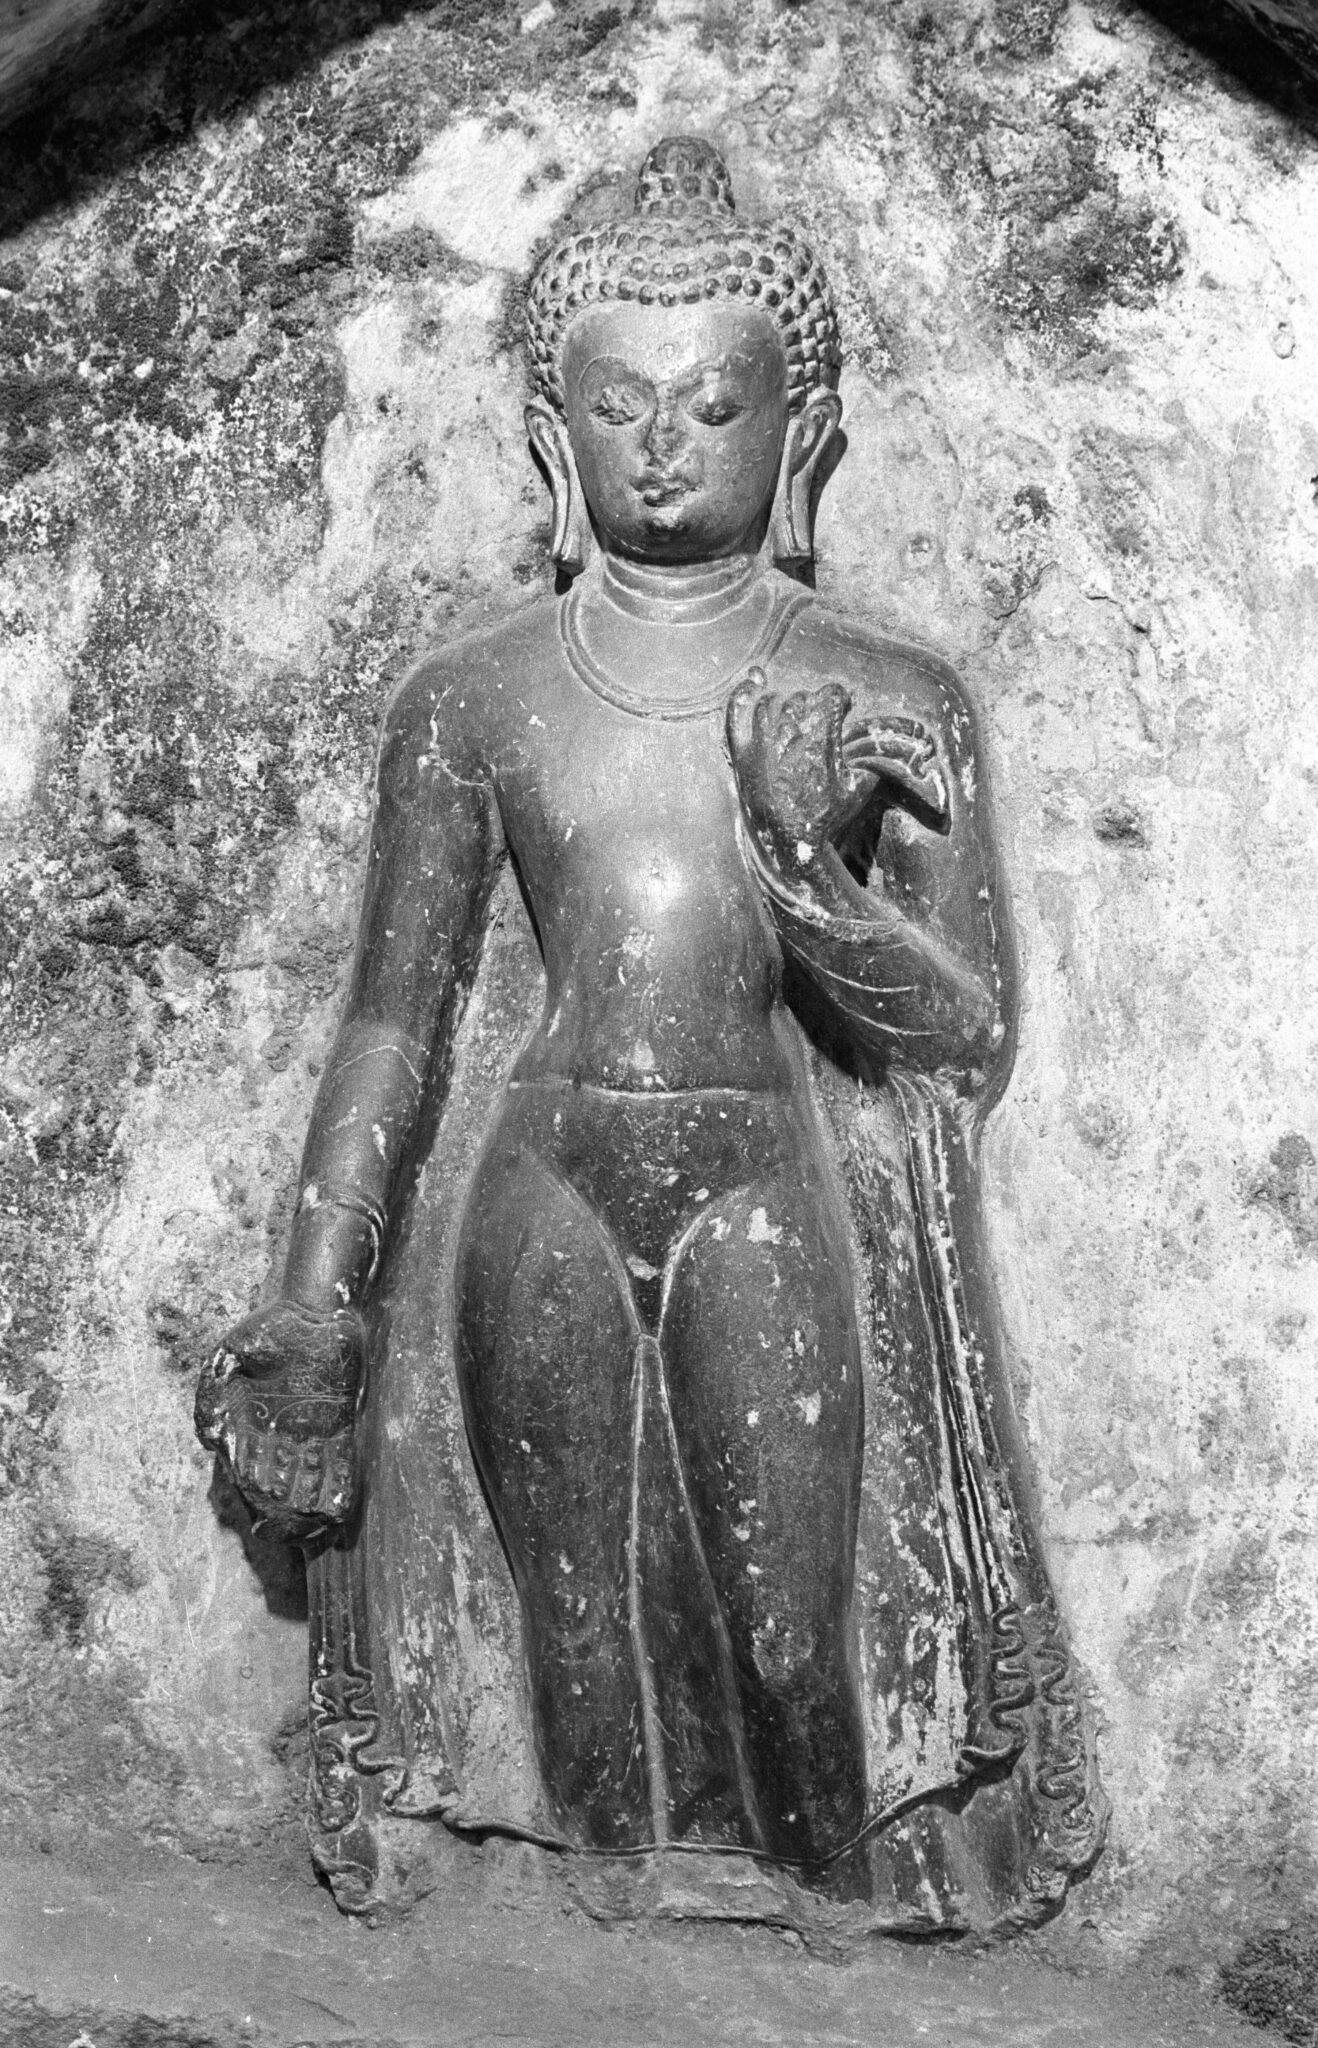 Black and white photograph of relief sculpture depicting elegantly carved Buddha against rough-hewn background; feet are missing